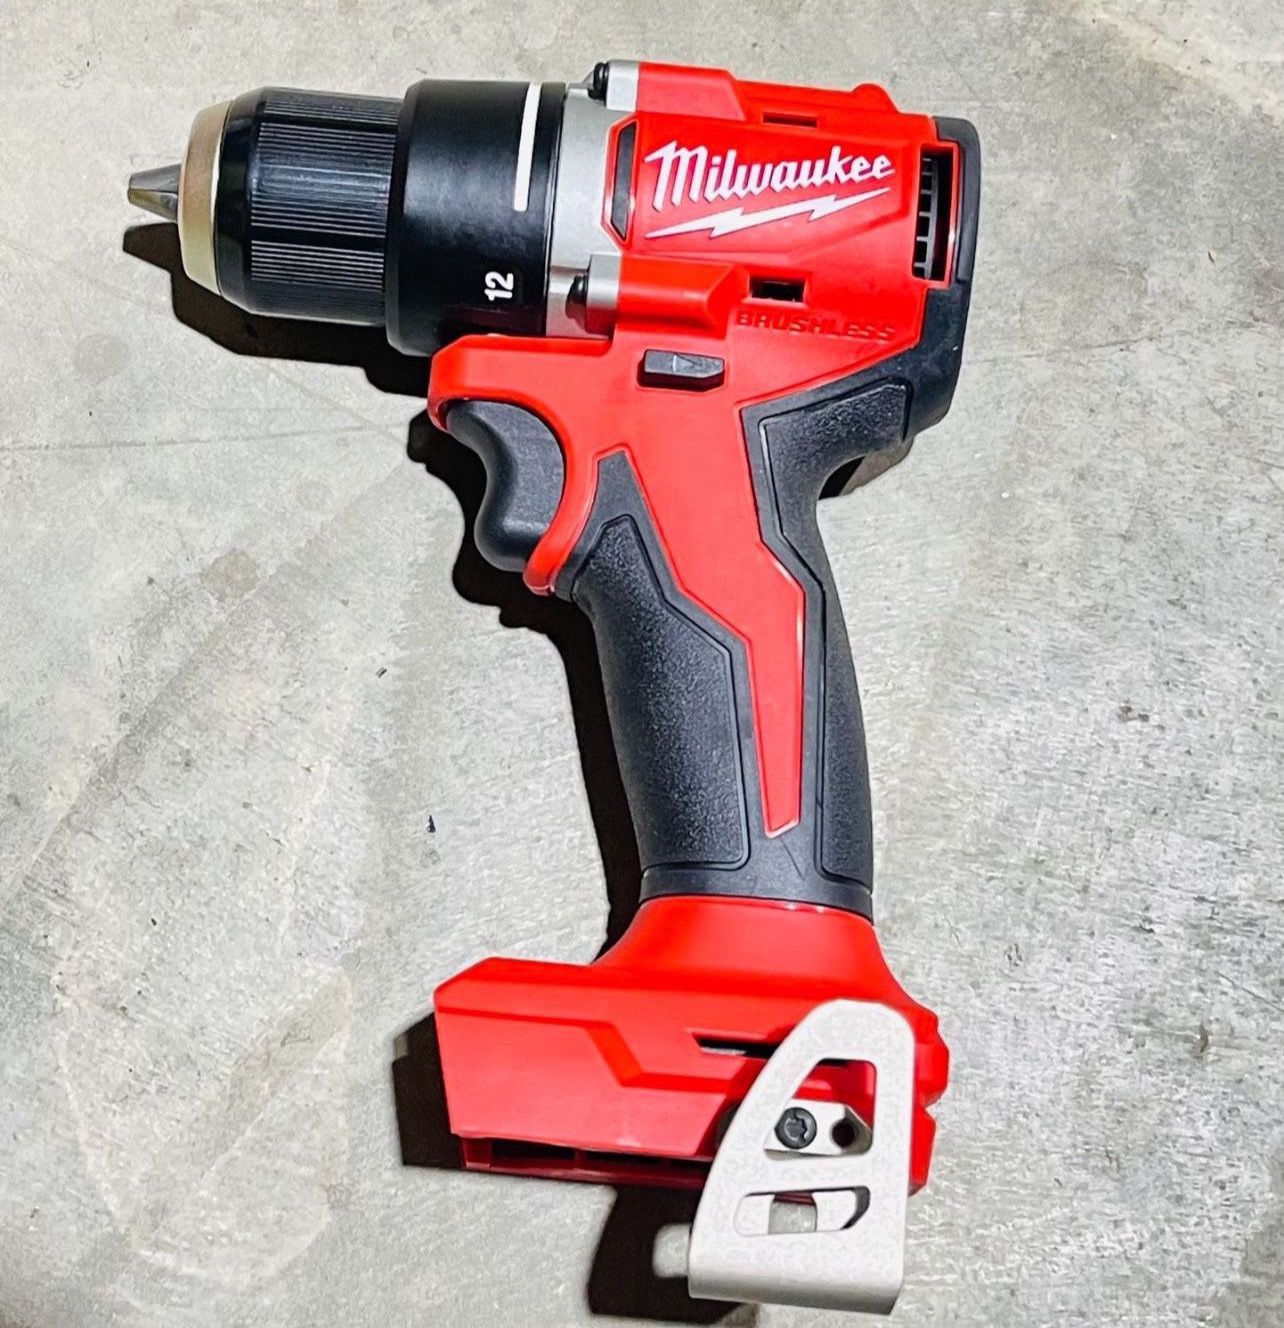 Milwaukee M18 18V Lithium-Ion Brushless Cordless 1/2 in. Compact Drill/Driver (Tool-Only)